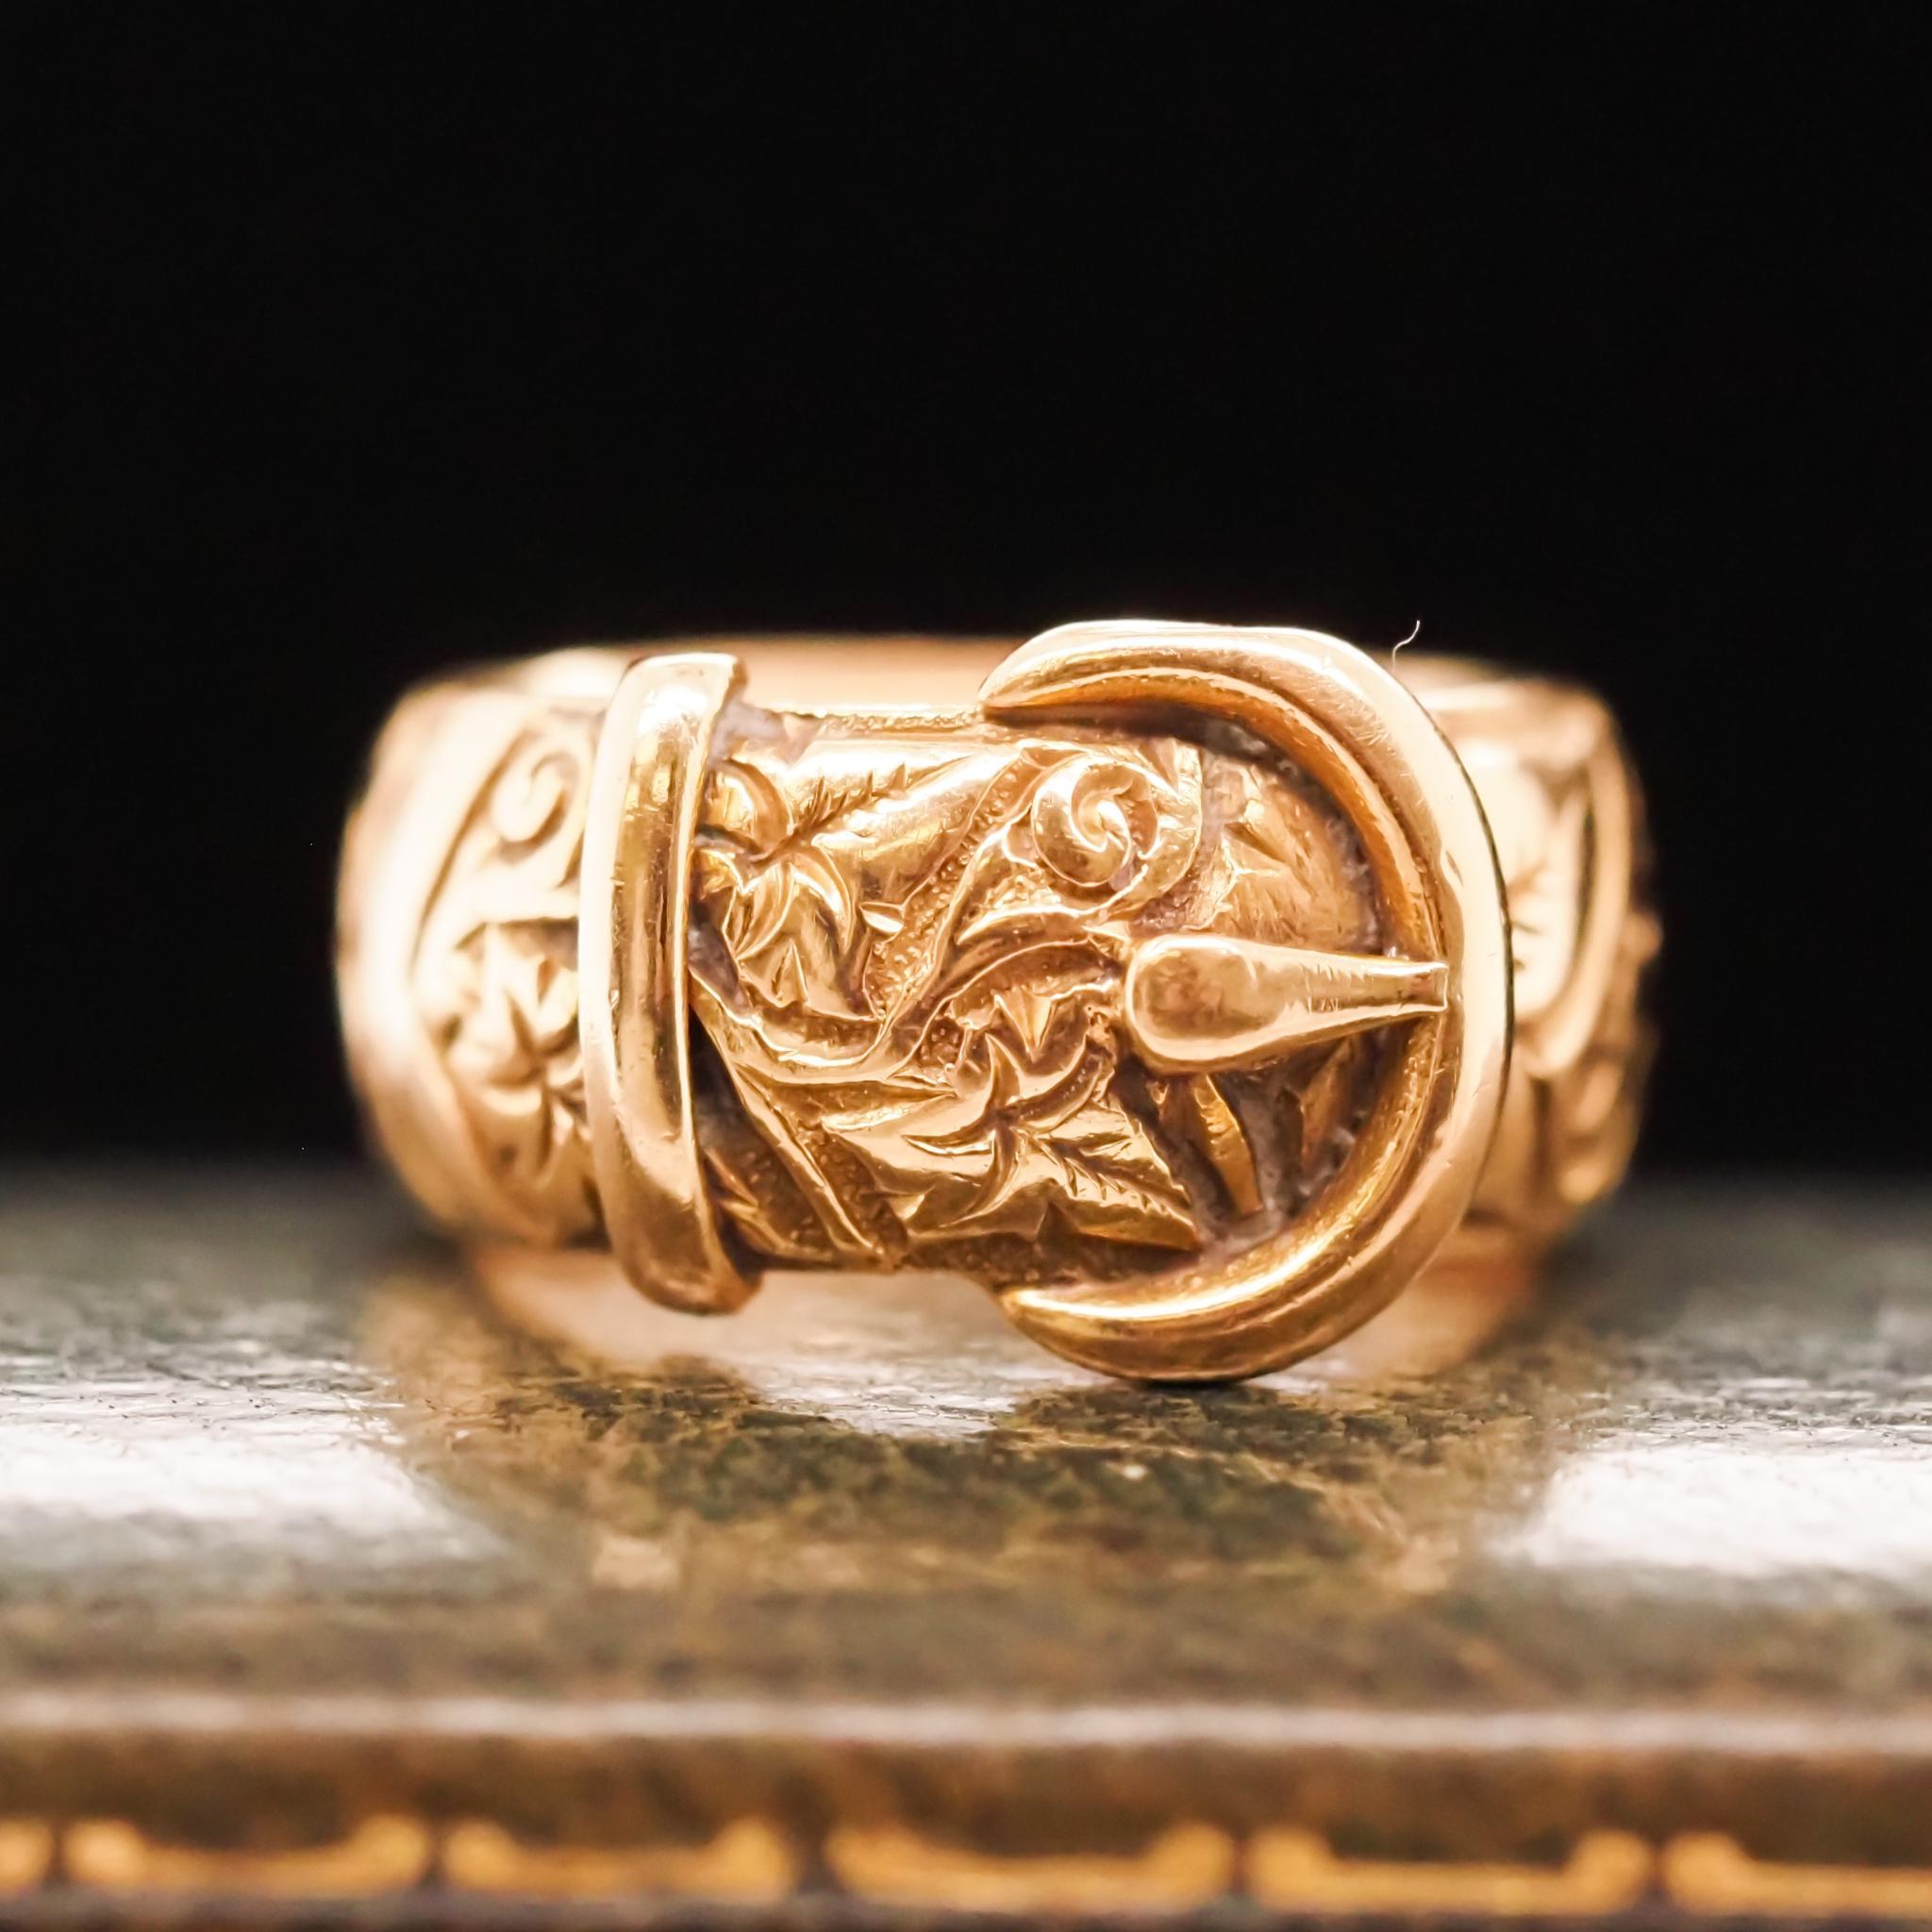 Year: 1890s
Item Details:
Ring Size: 6 (Sizable)
Metal Type: 18k yellow gold [Hallmarked, and Tested]
Weight: 11.7 grams
Band Width: 9 mm
Condition: Excellent